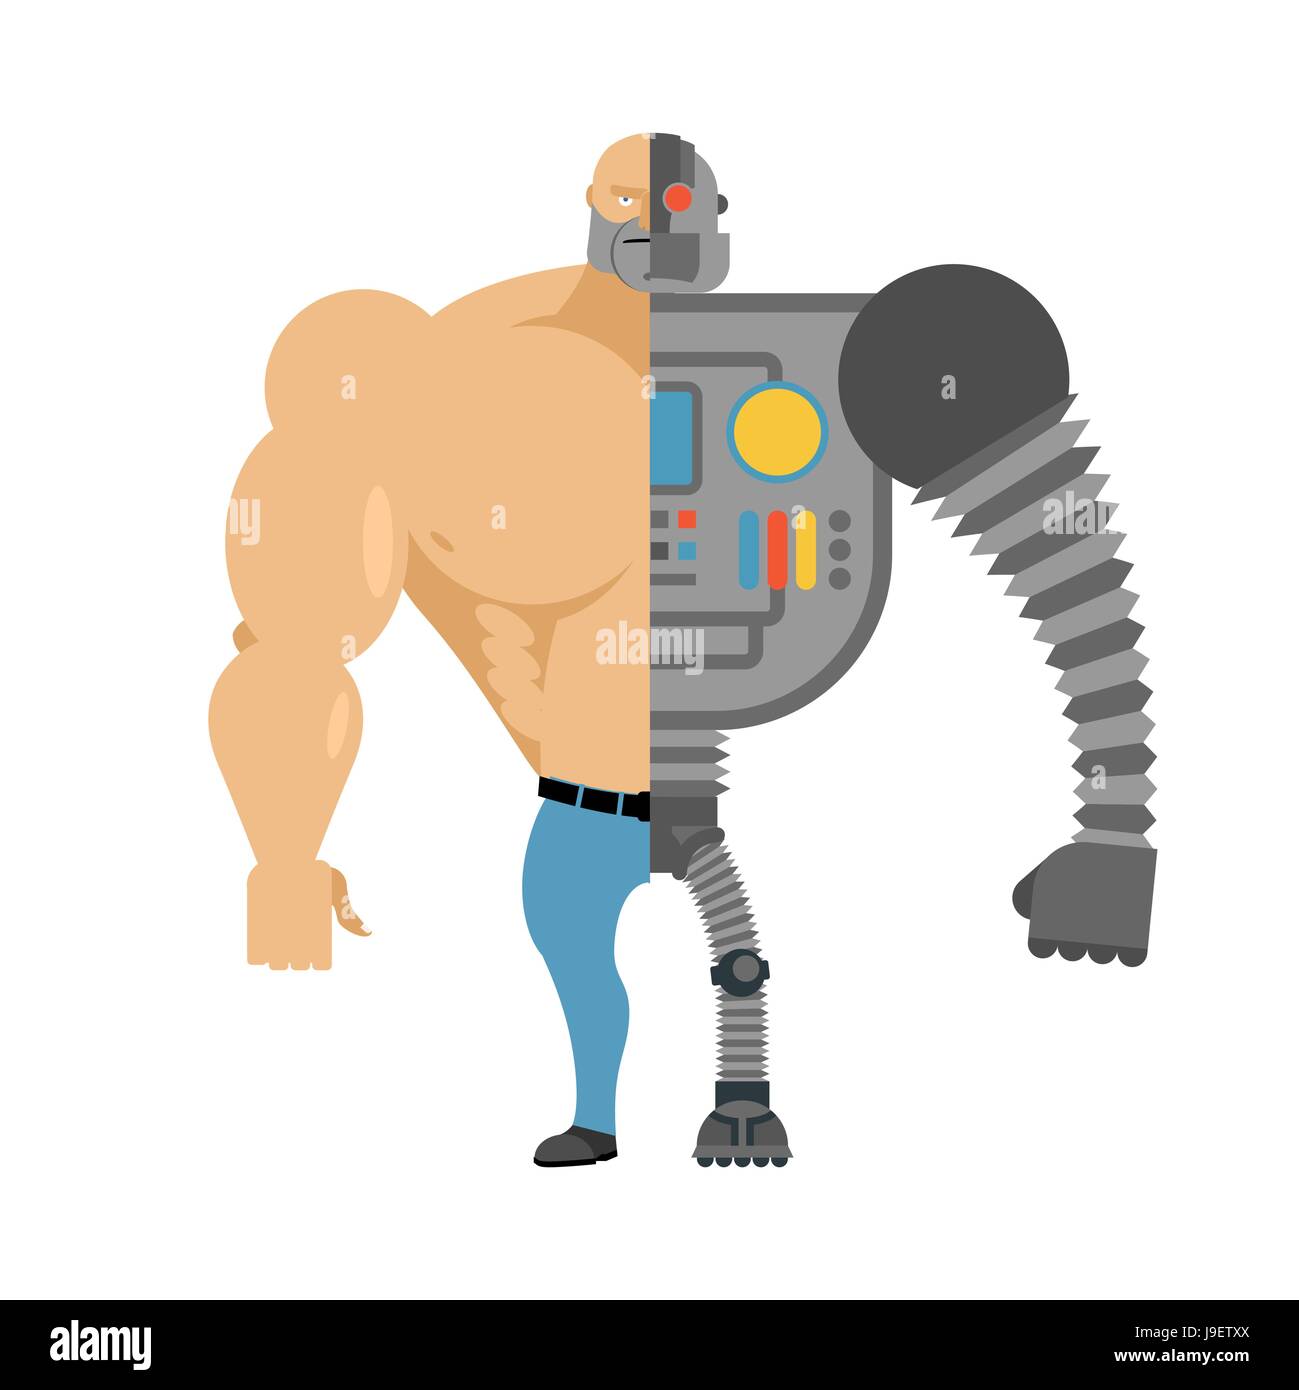 Cyborg. Half human half robot. Man with big muscles and iron limbs. Cyber-man of future. Stock Vector